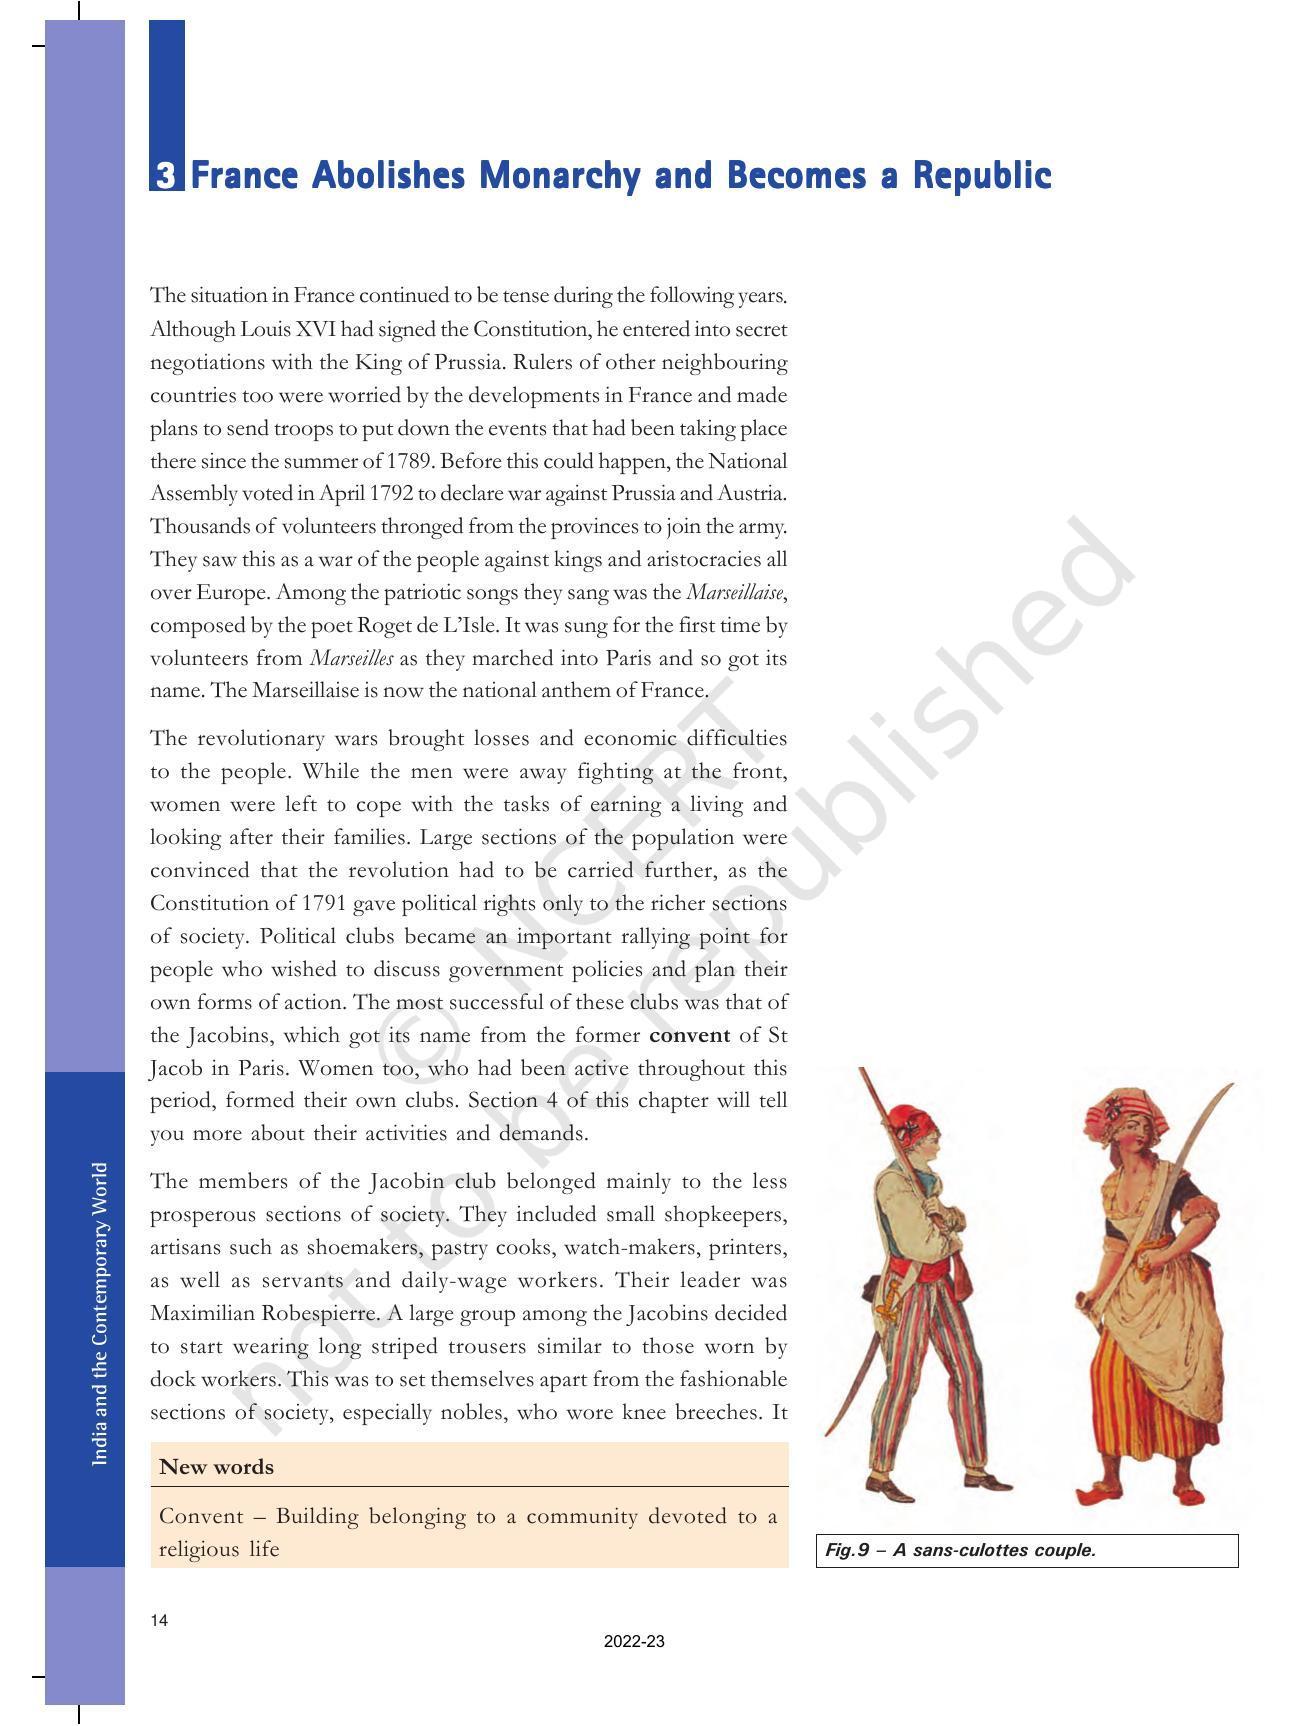 NCERT Book for Class 9 History Chapter 1 The French Revolution - Page 14